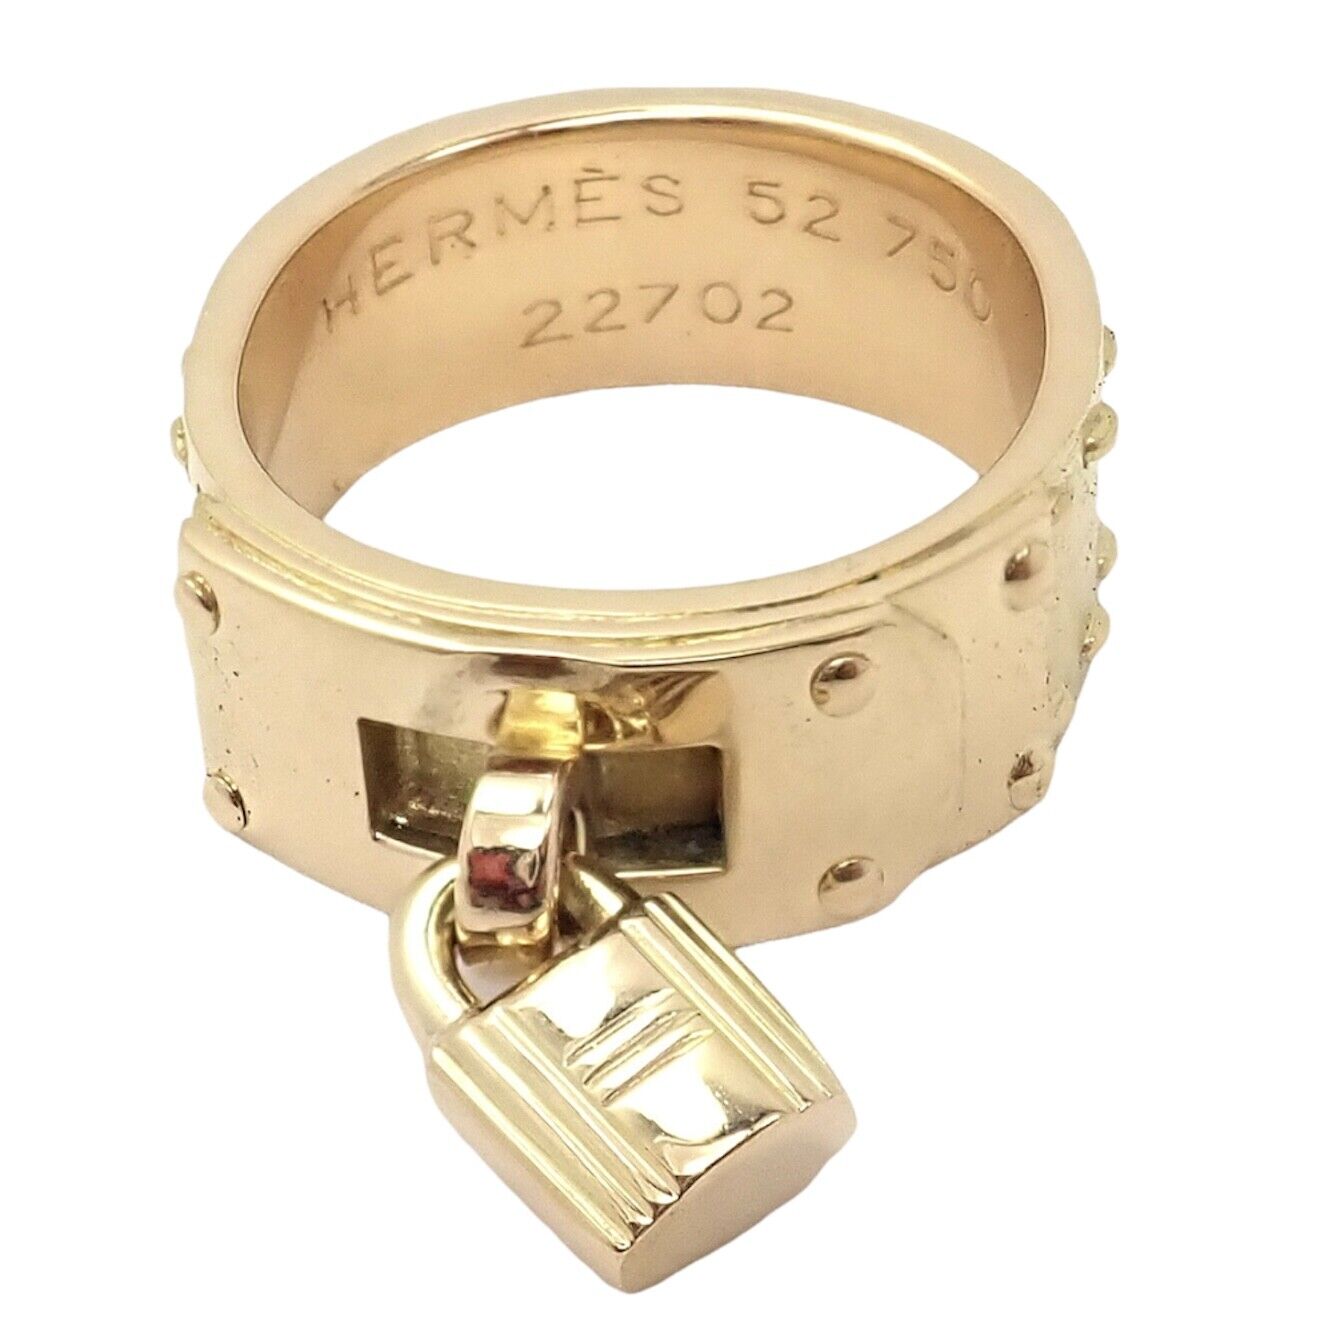 Rare! Authentic Vintage Hermes 18k Yellow Gold 